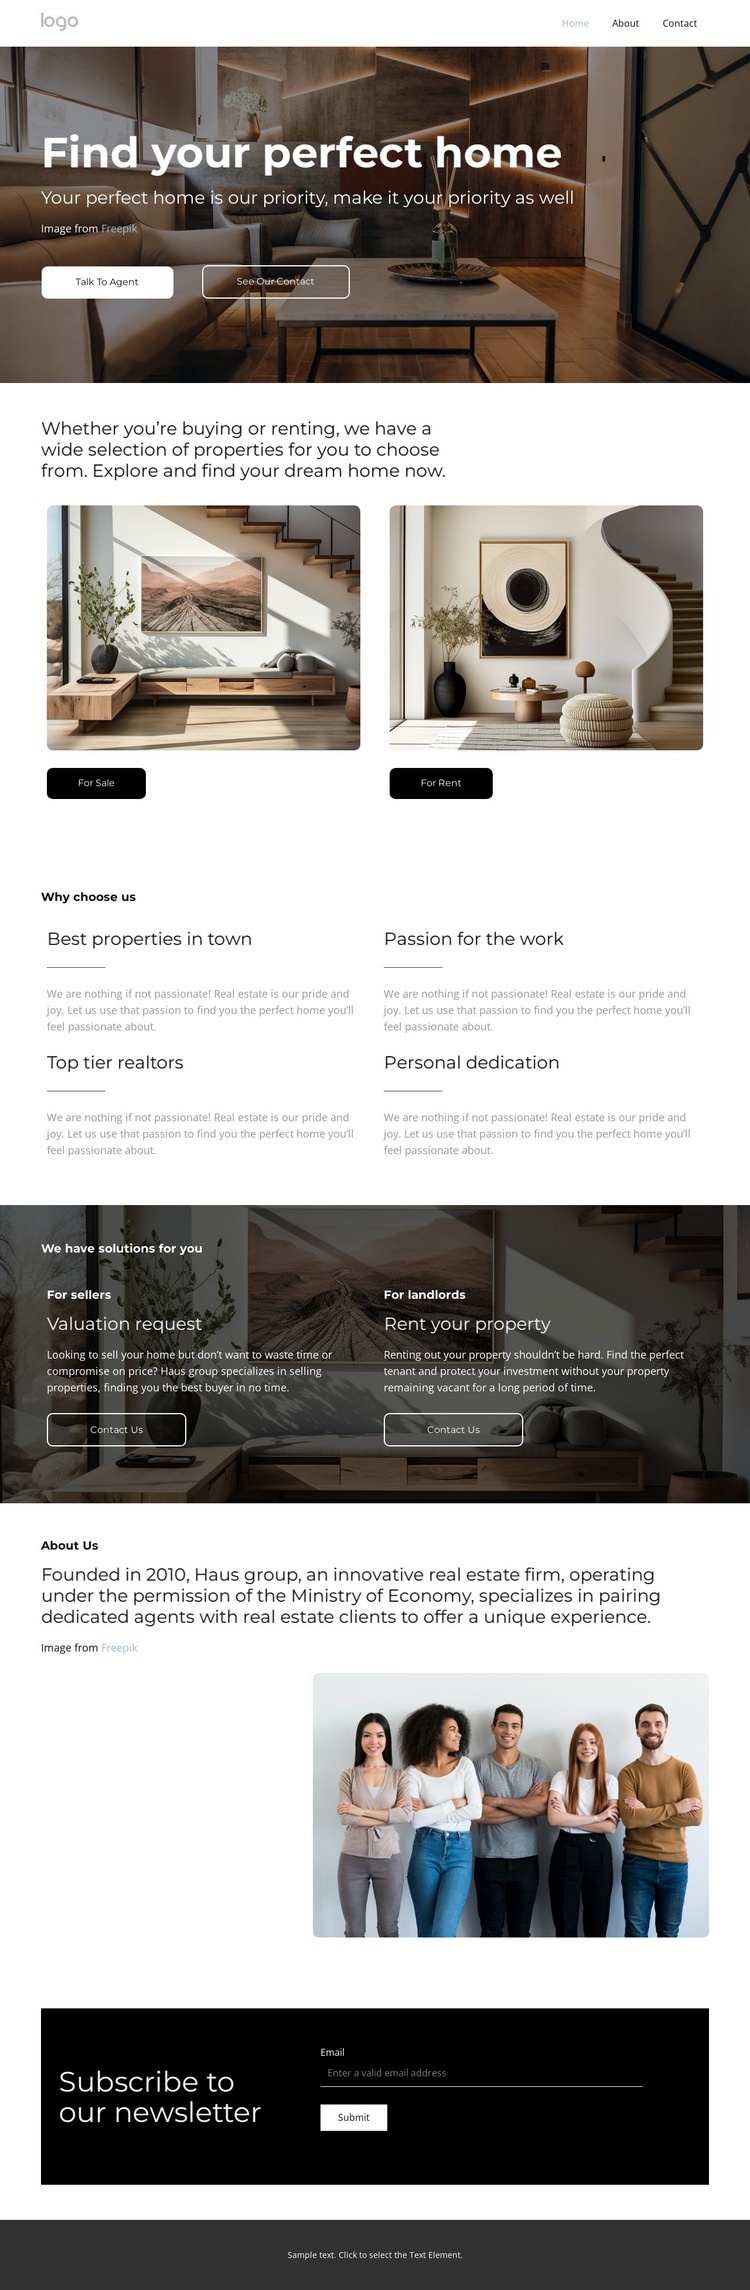 How to pack your stuff Homepage Design